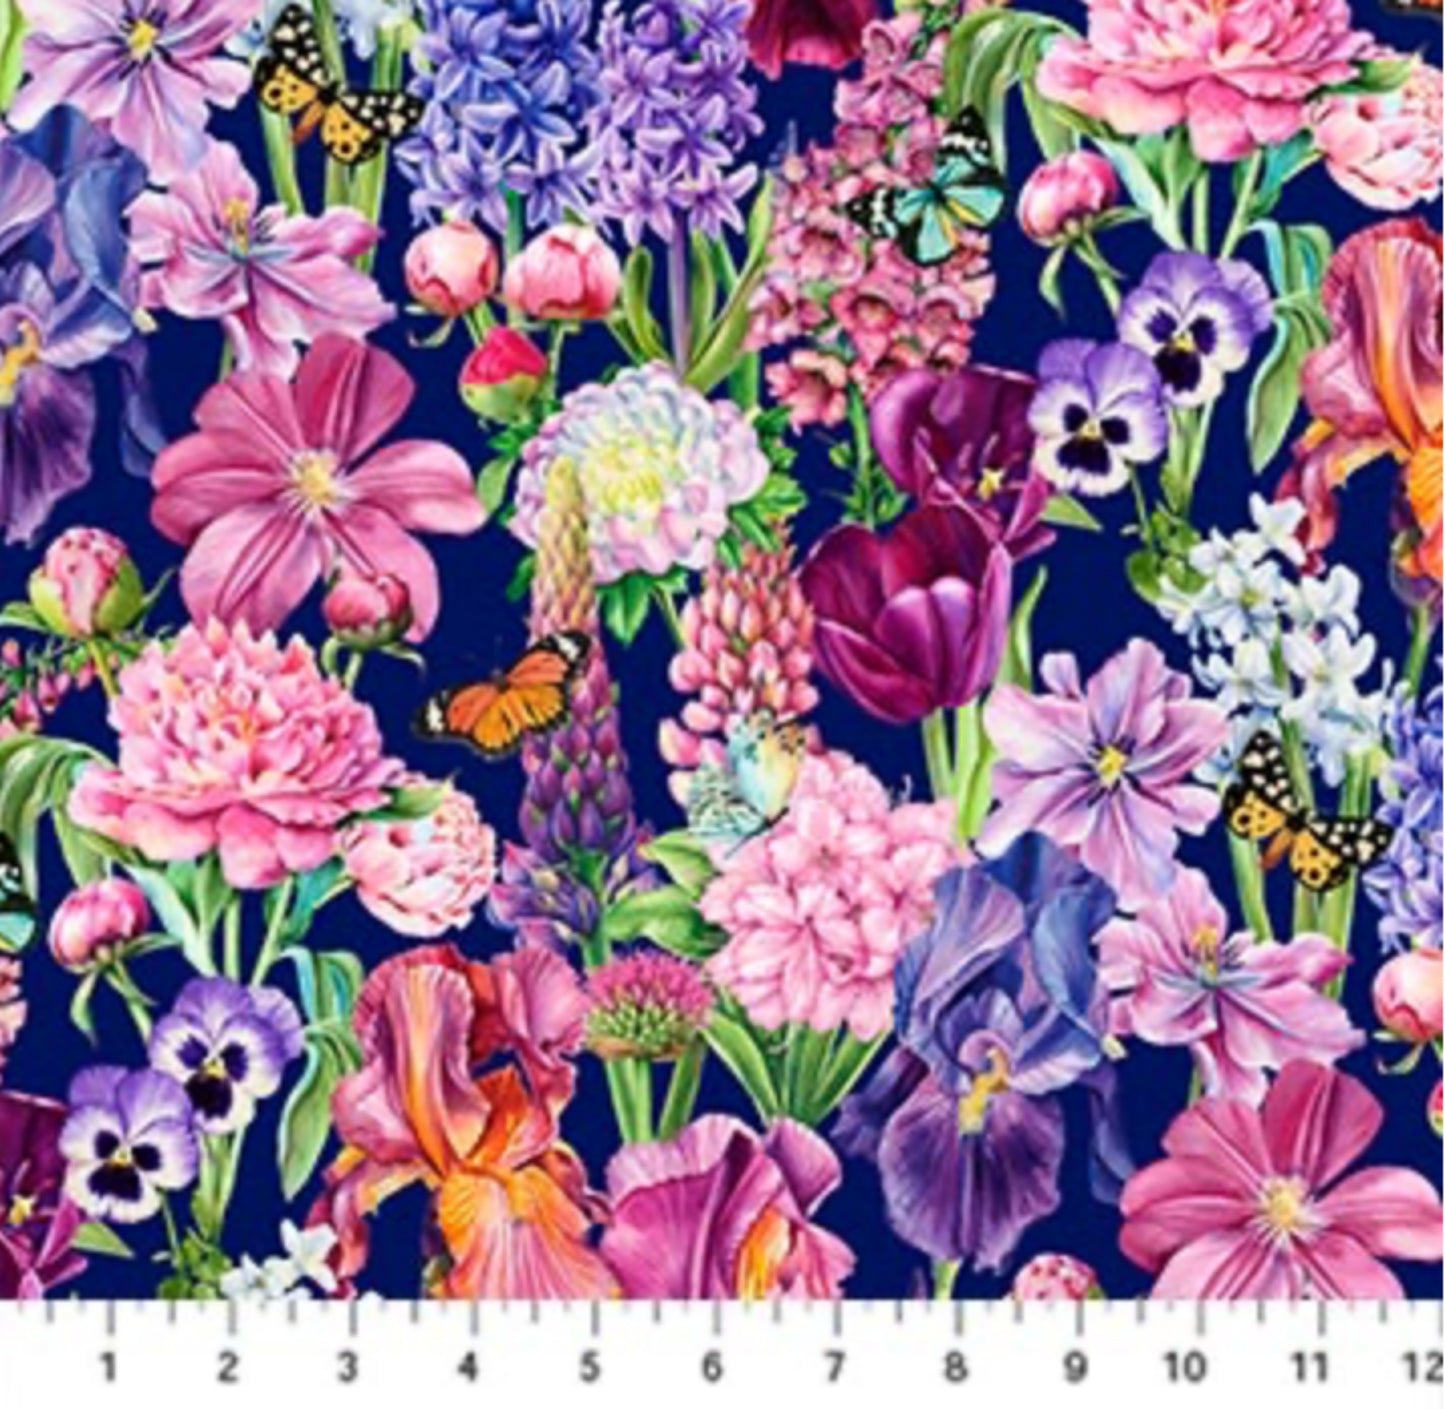 Large Packed Floral Fabric - Deborah's Garden Collection - Northcott Fabrics